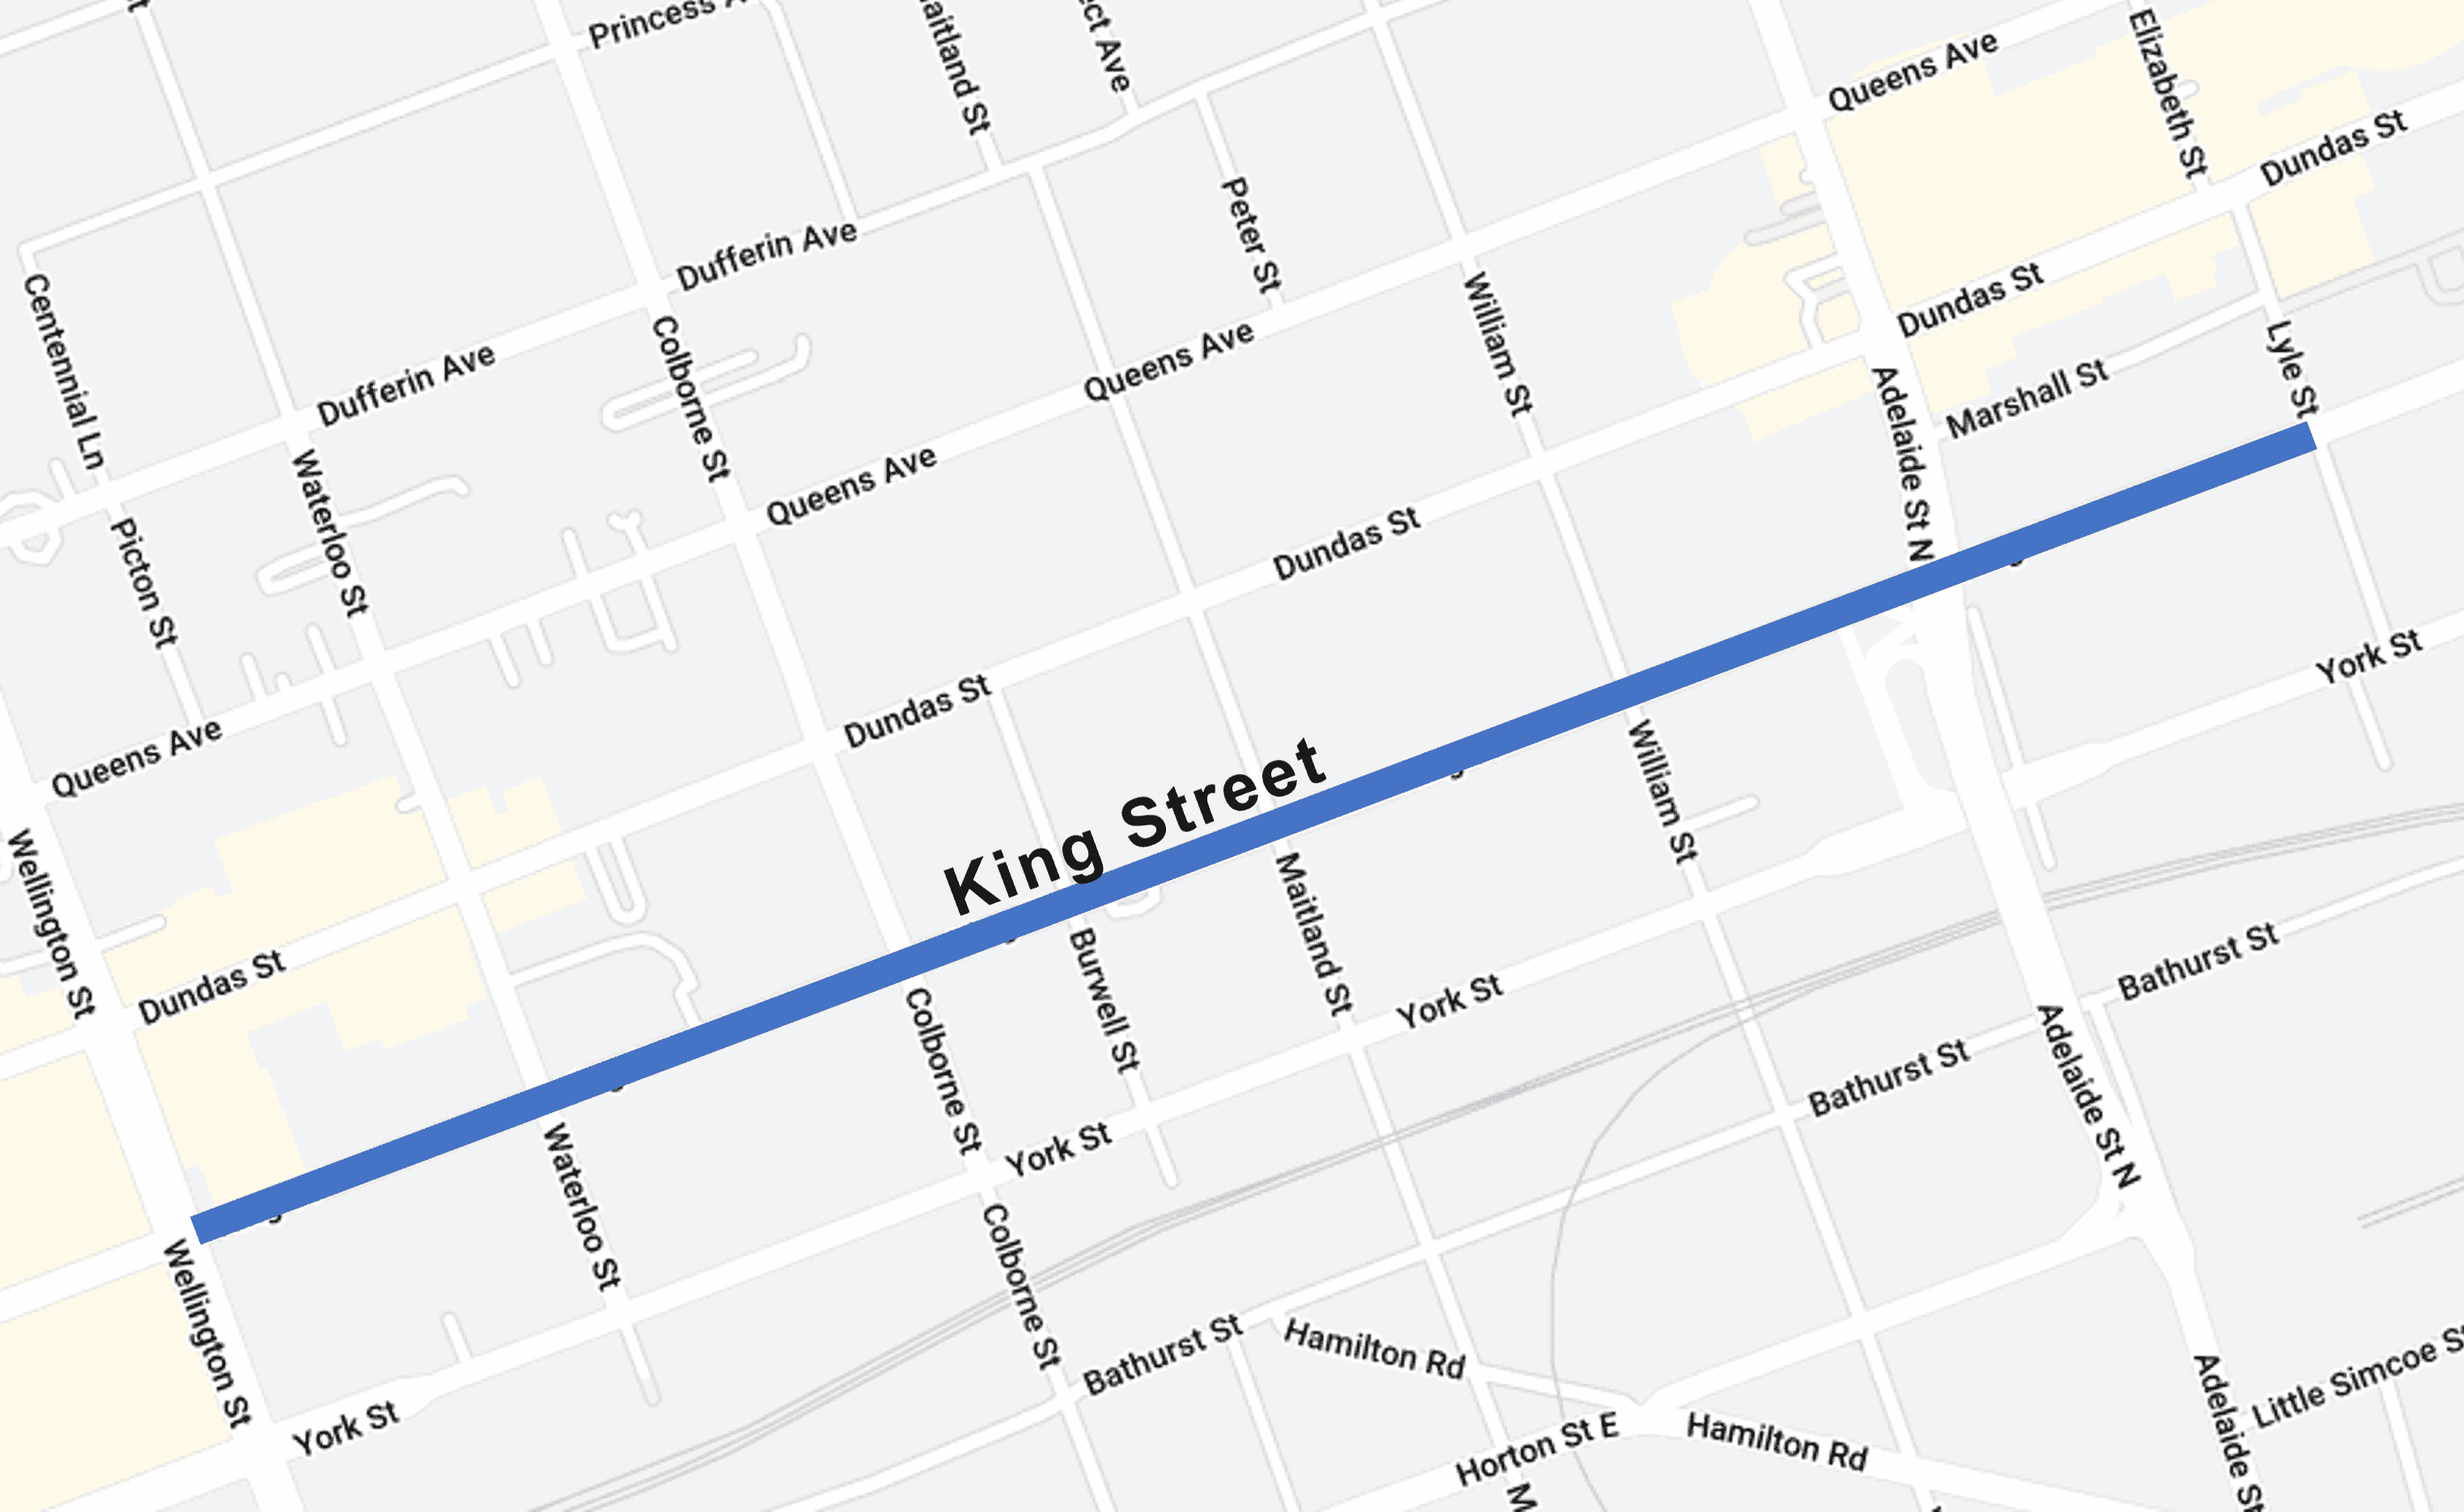 Line painting and lane restrictions on King Street